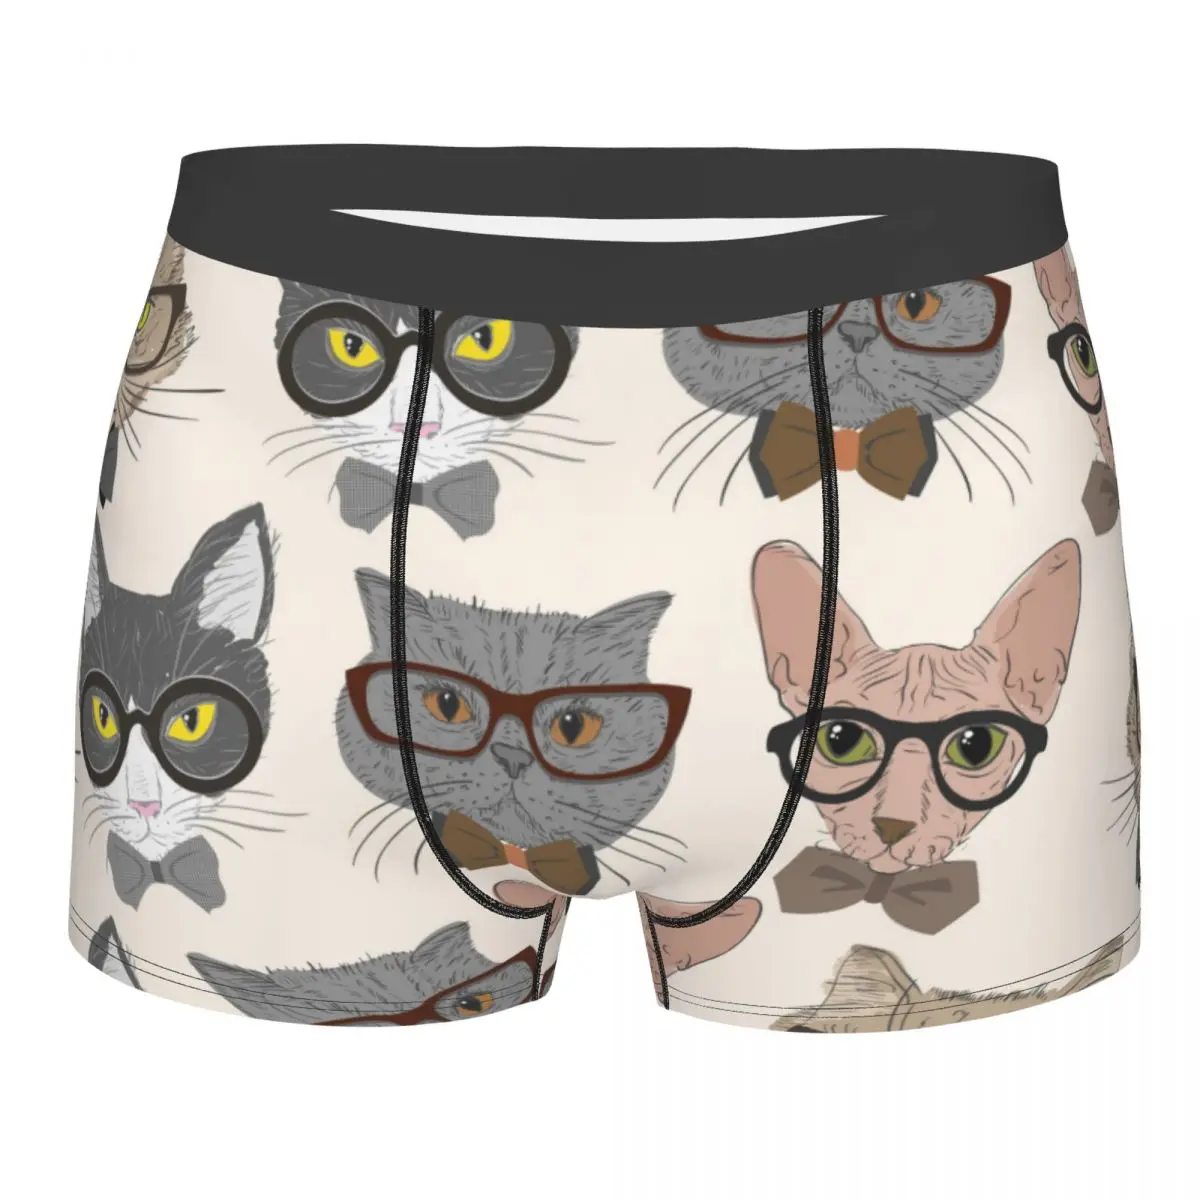 

Men's Panties Underpants Boxershorts Hipster Cats Underwear for Man Sexy Male Boxer Shorts